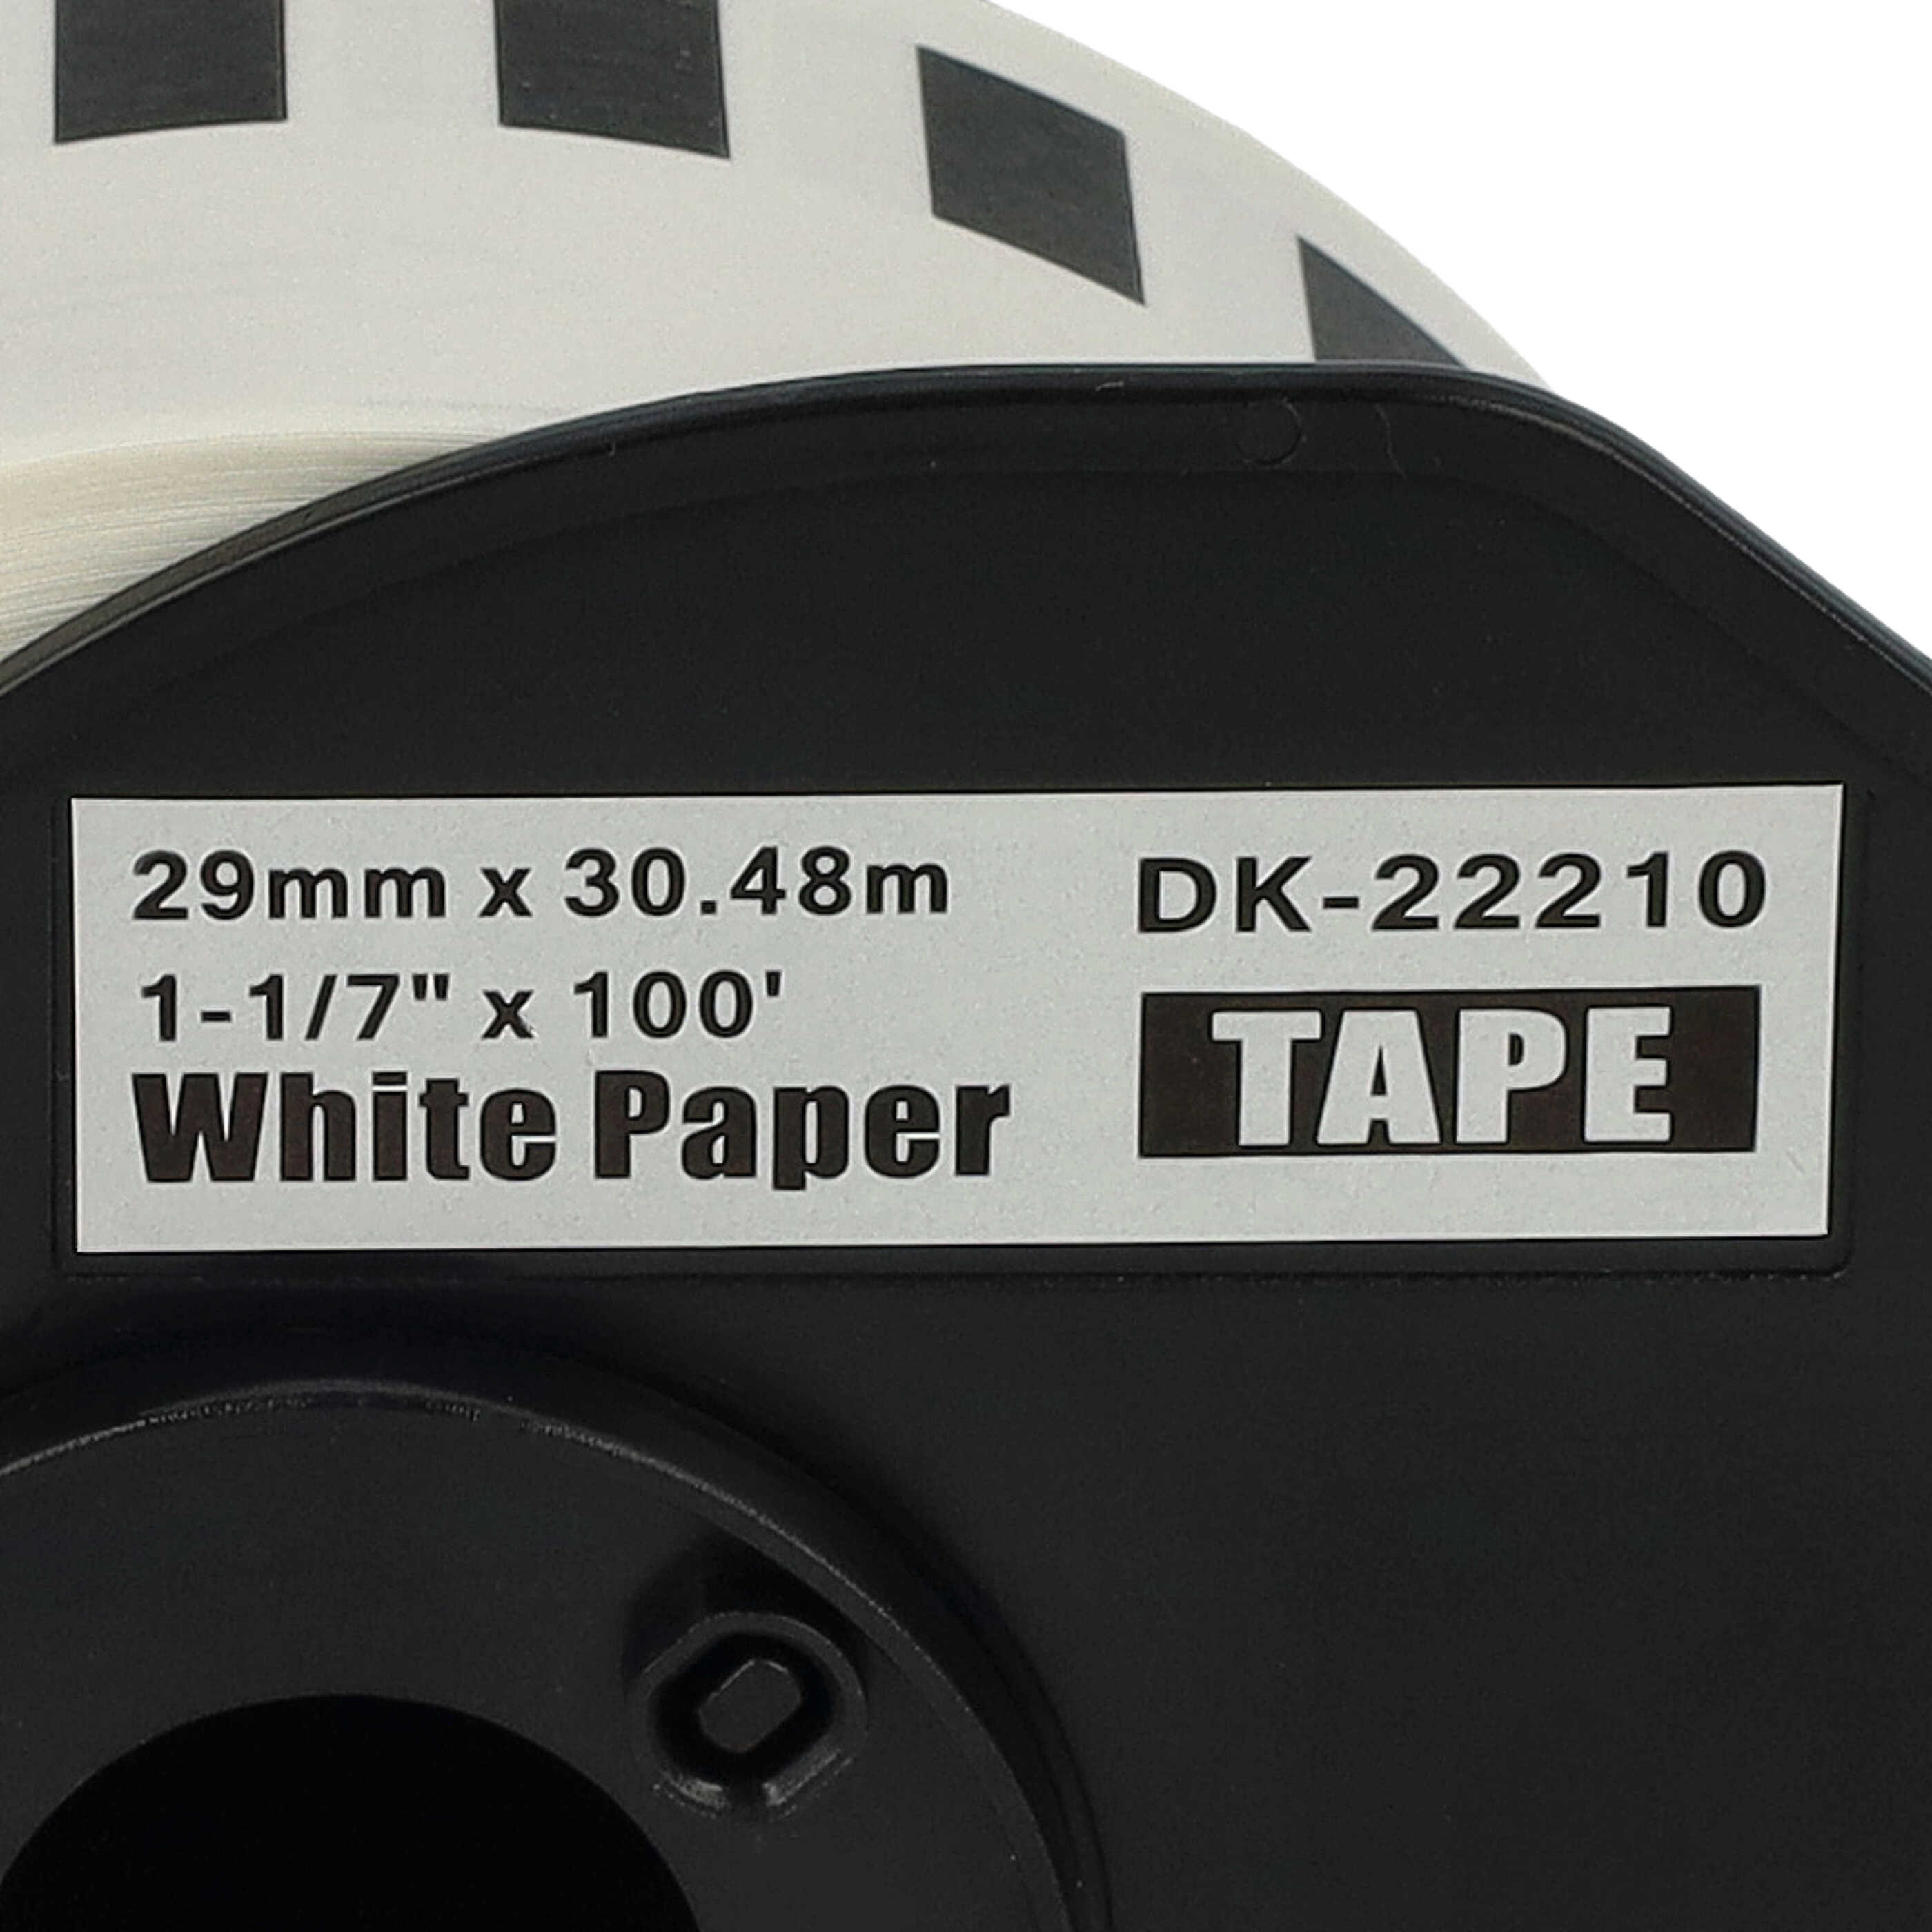 Labels replaces Brother DK-22210 for Labeller - 29 mm x 30.48m + Holder